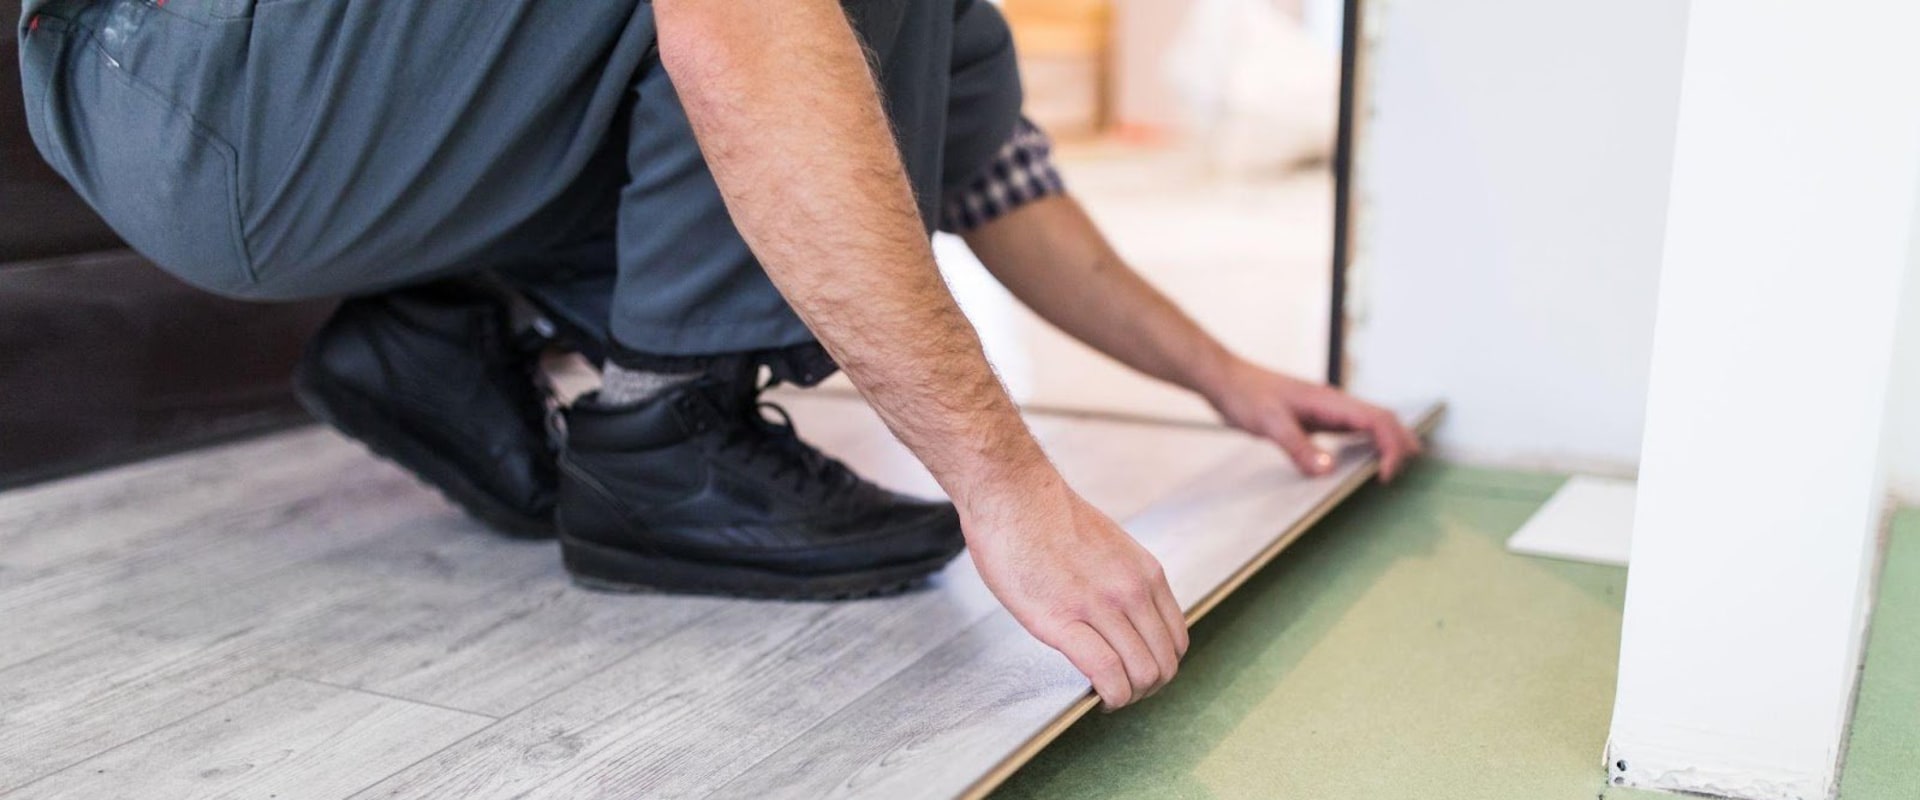 What happens if you don't acclimate laminate flooring?